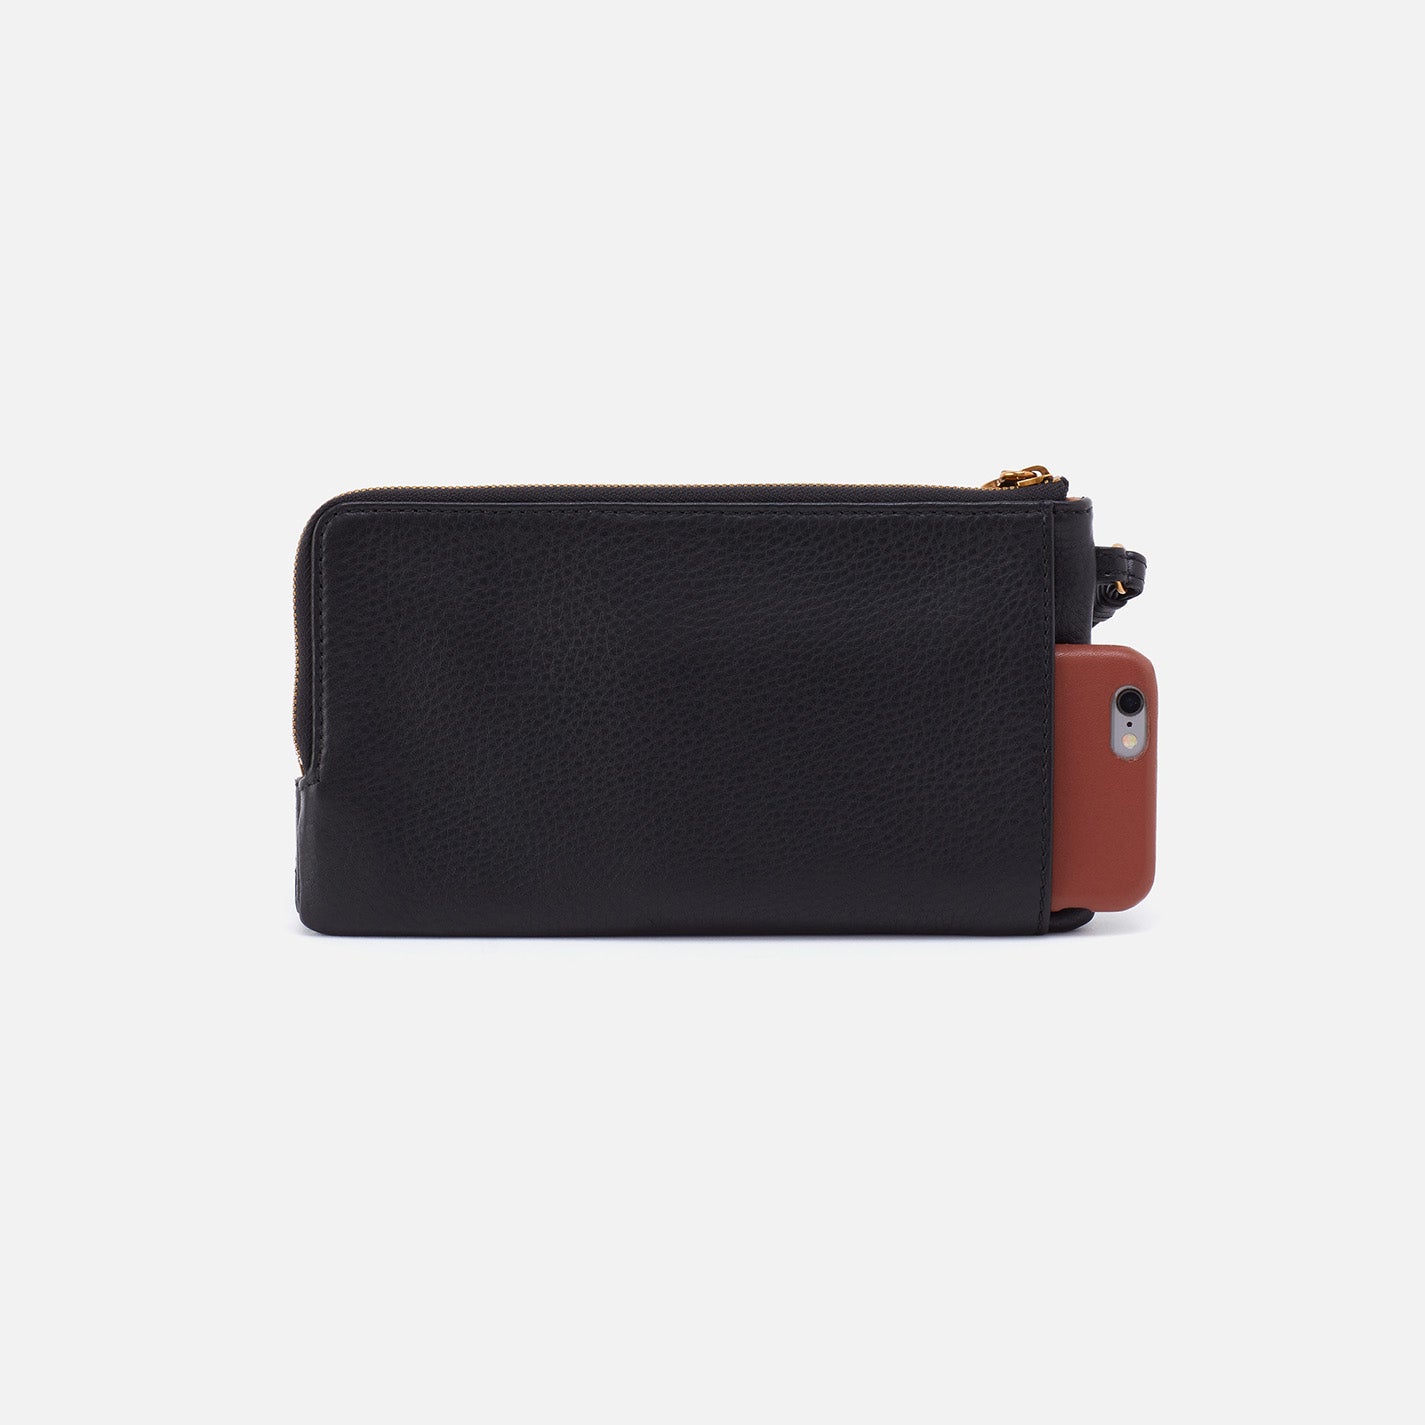 back view of black  Dayton Wristlet with phone in pocket.